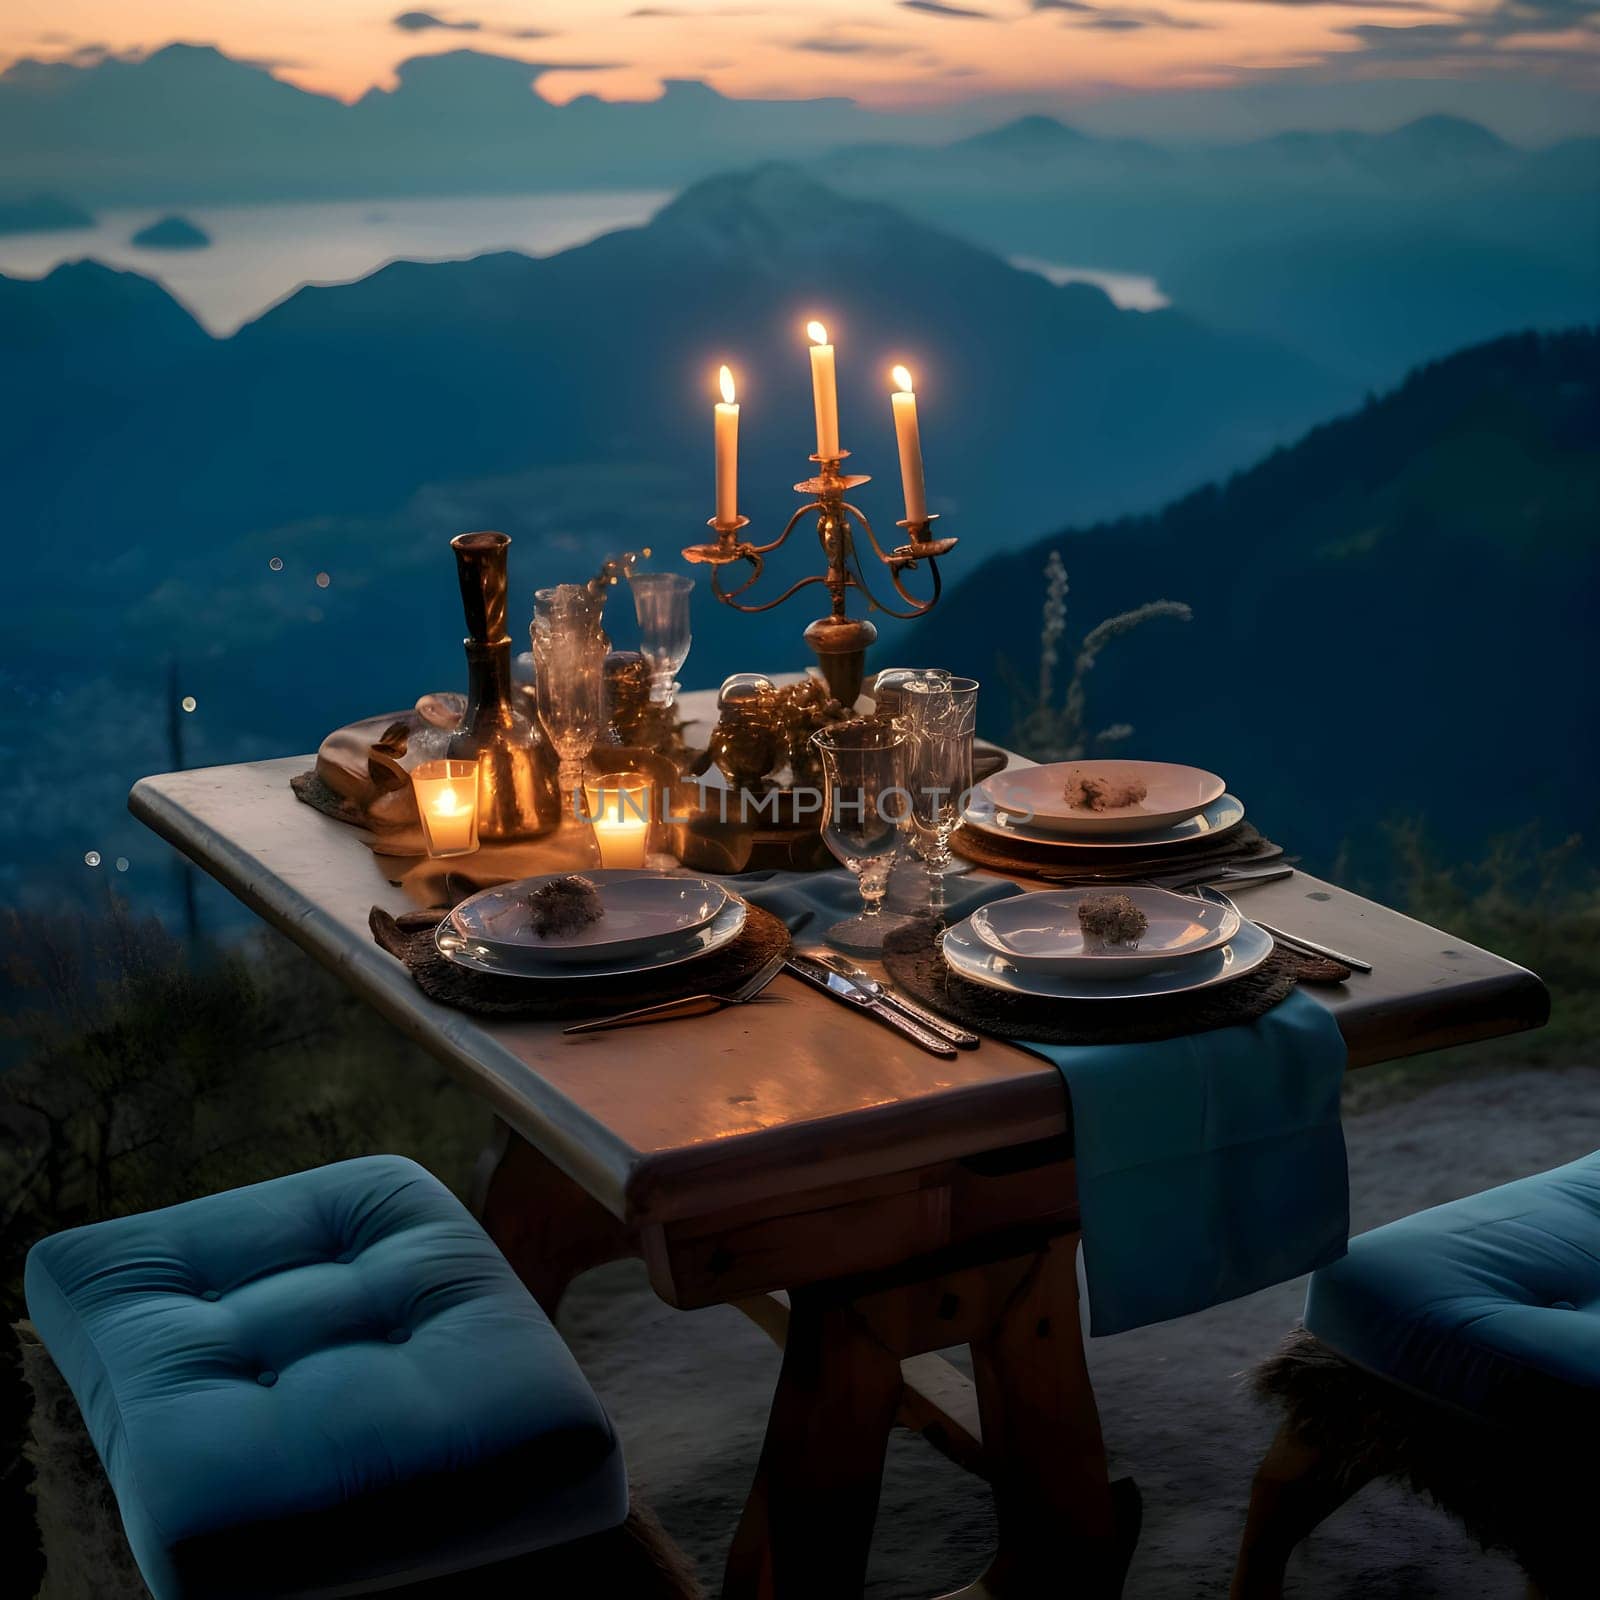 An elegantly set table overlooks mountains and a lake. Lit candles add to the romantic ambiance in this scenic setting.